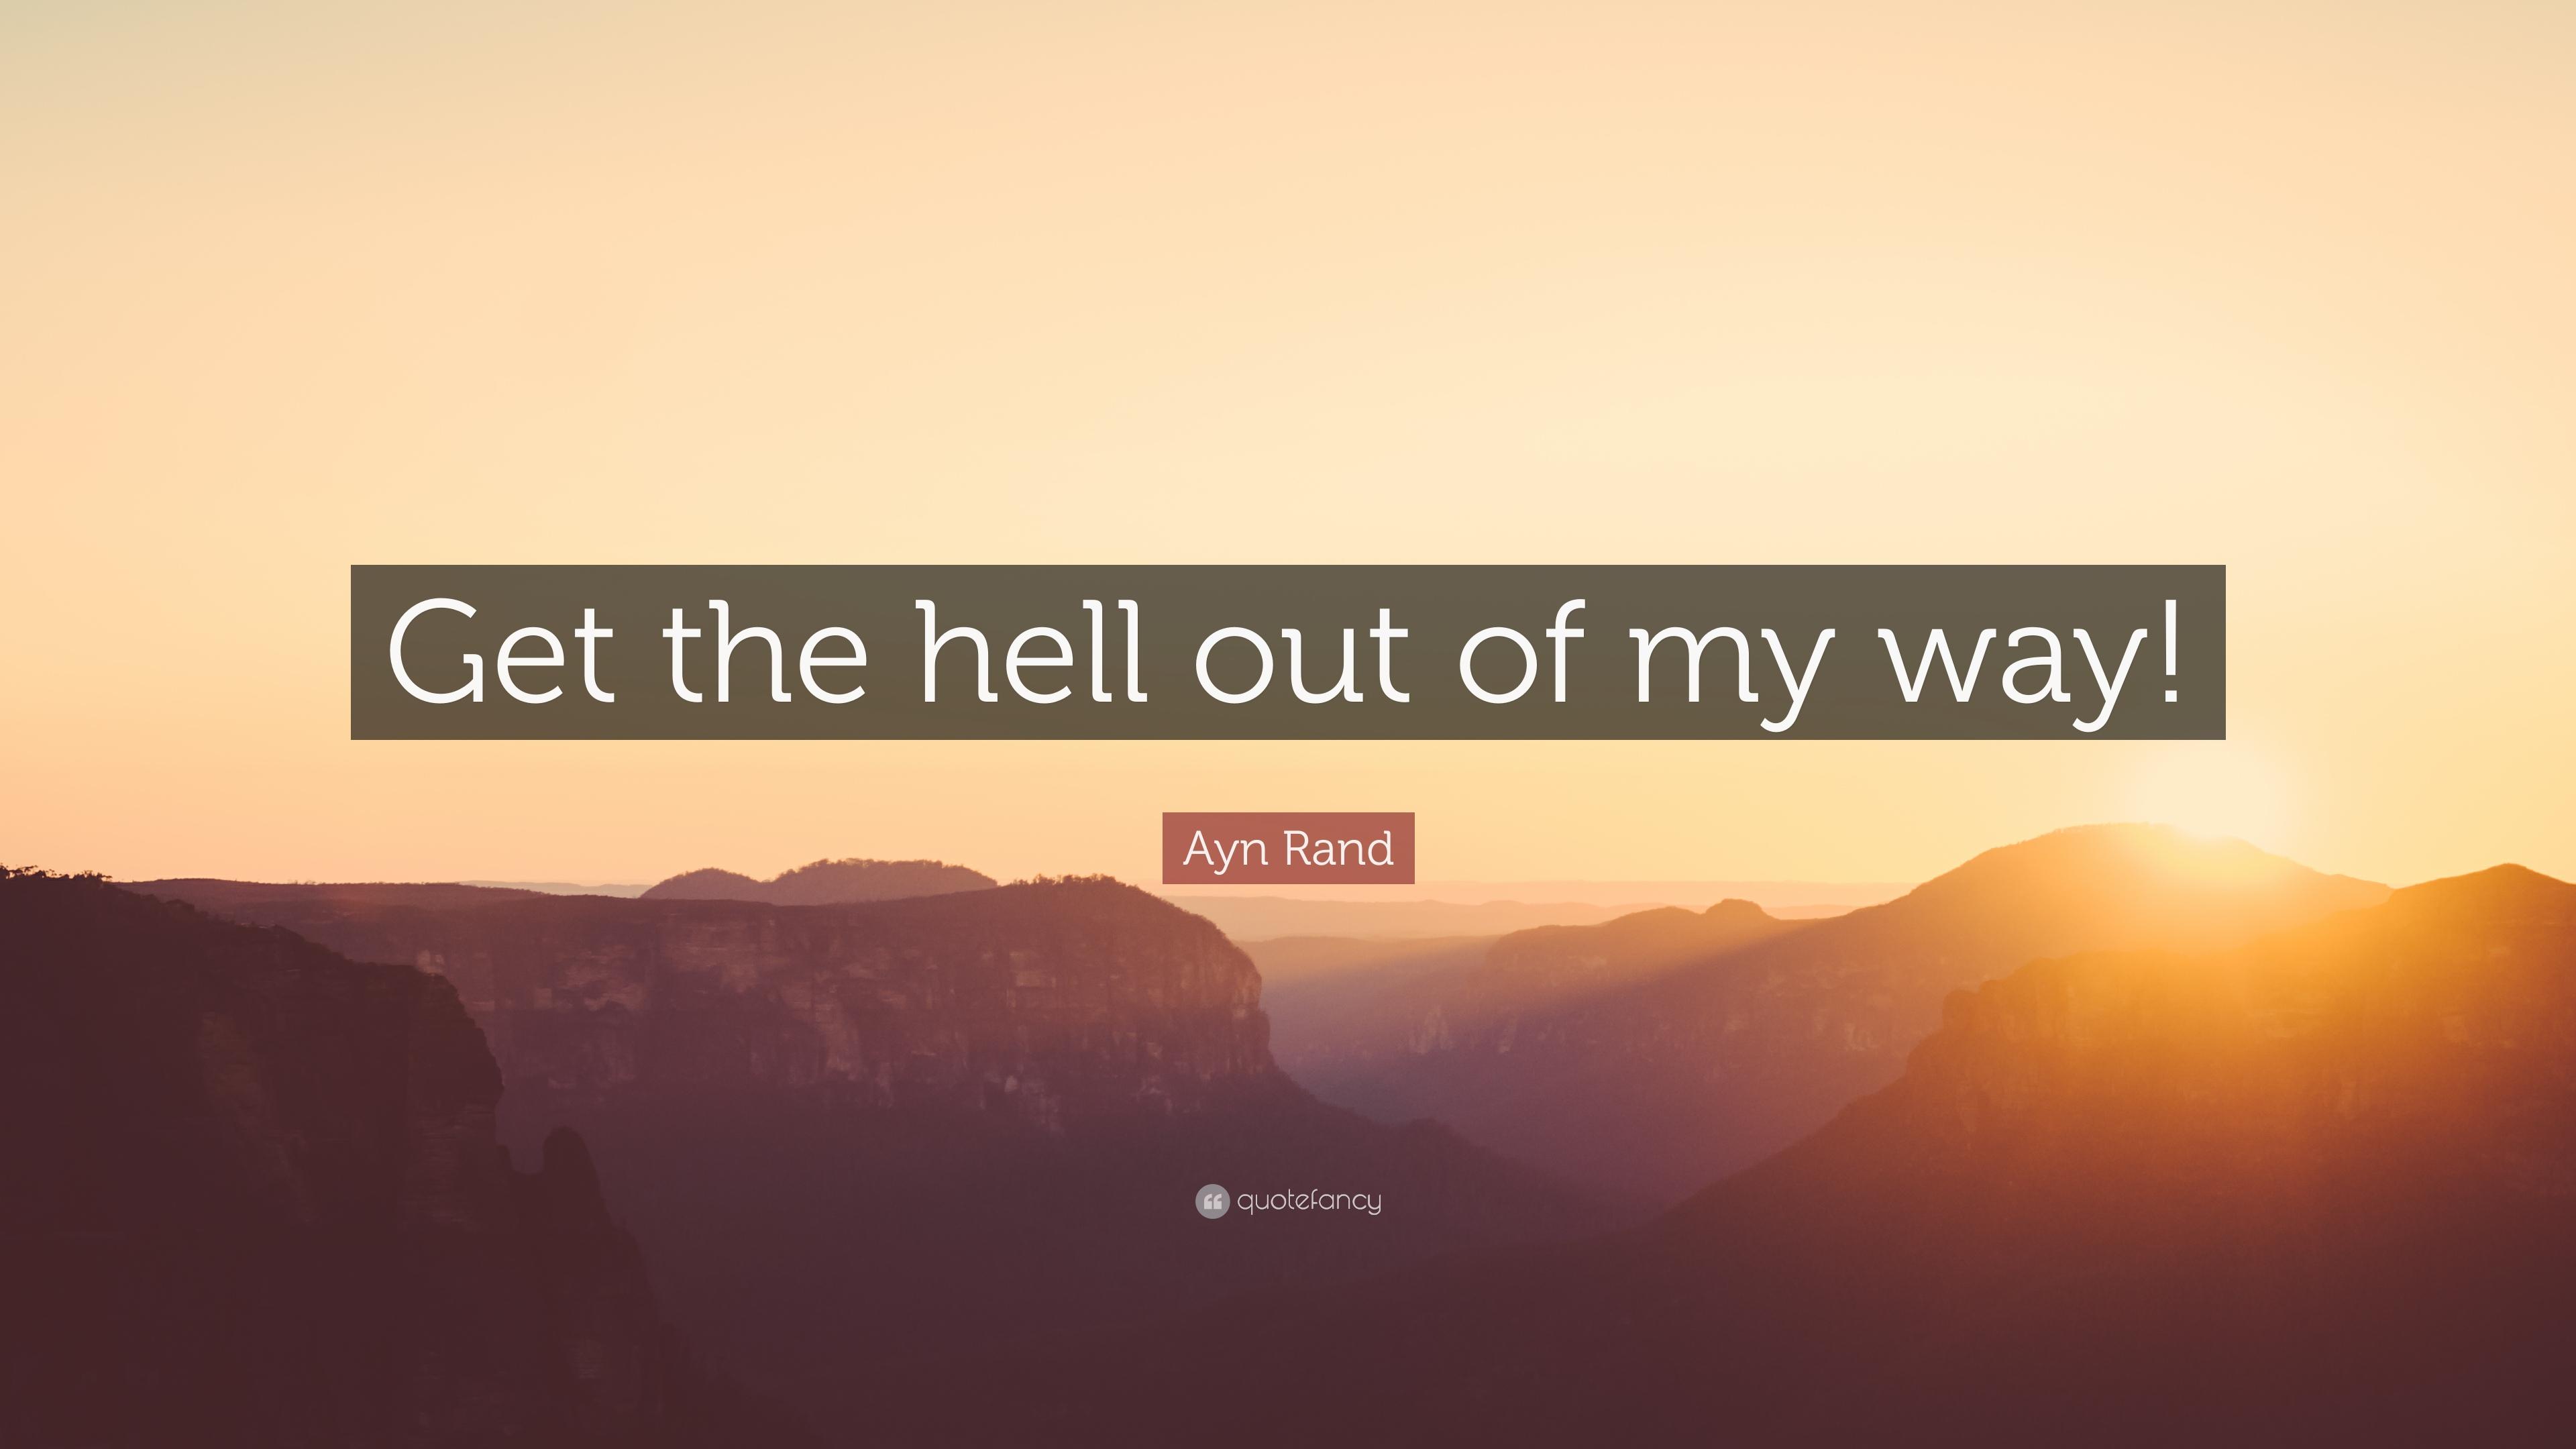 Ayn Rand Quote: “Get the hell out of my way!” 7 wallpaper